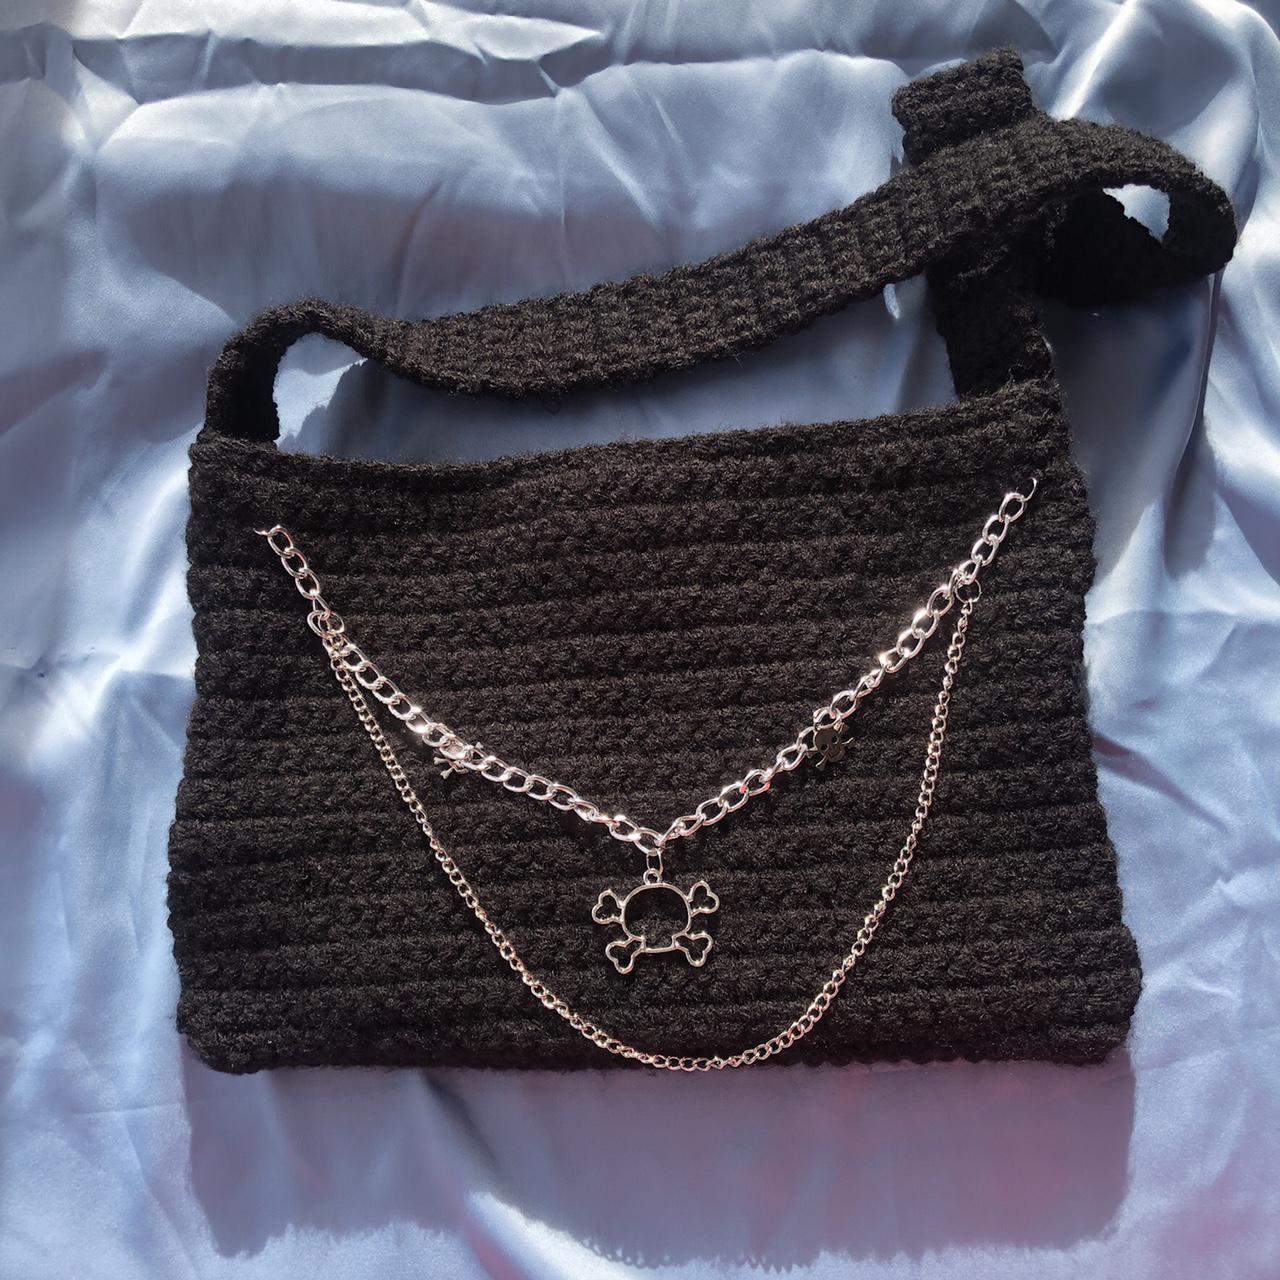 Product Image 2 - -skull crochet bag
-APPROX: 10.5x7.25 inches